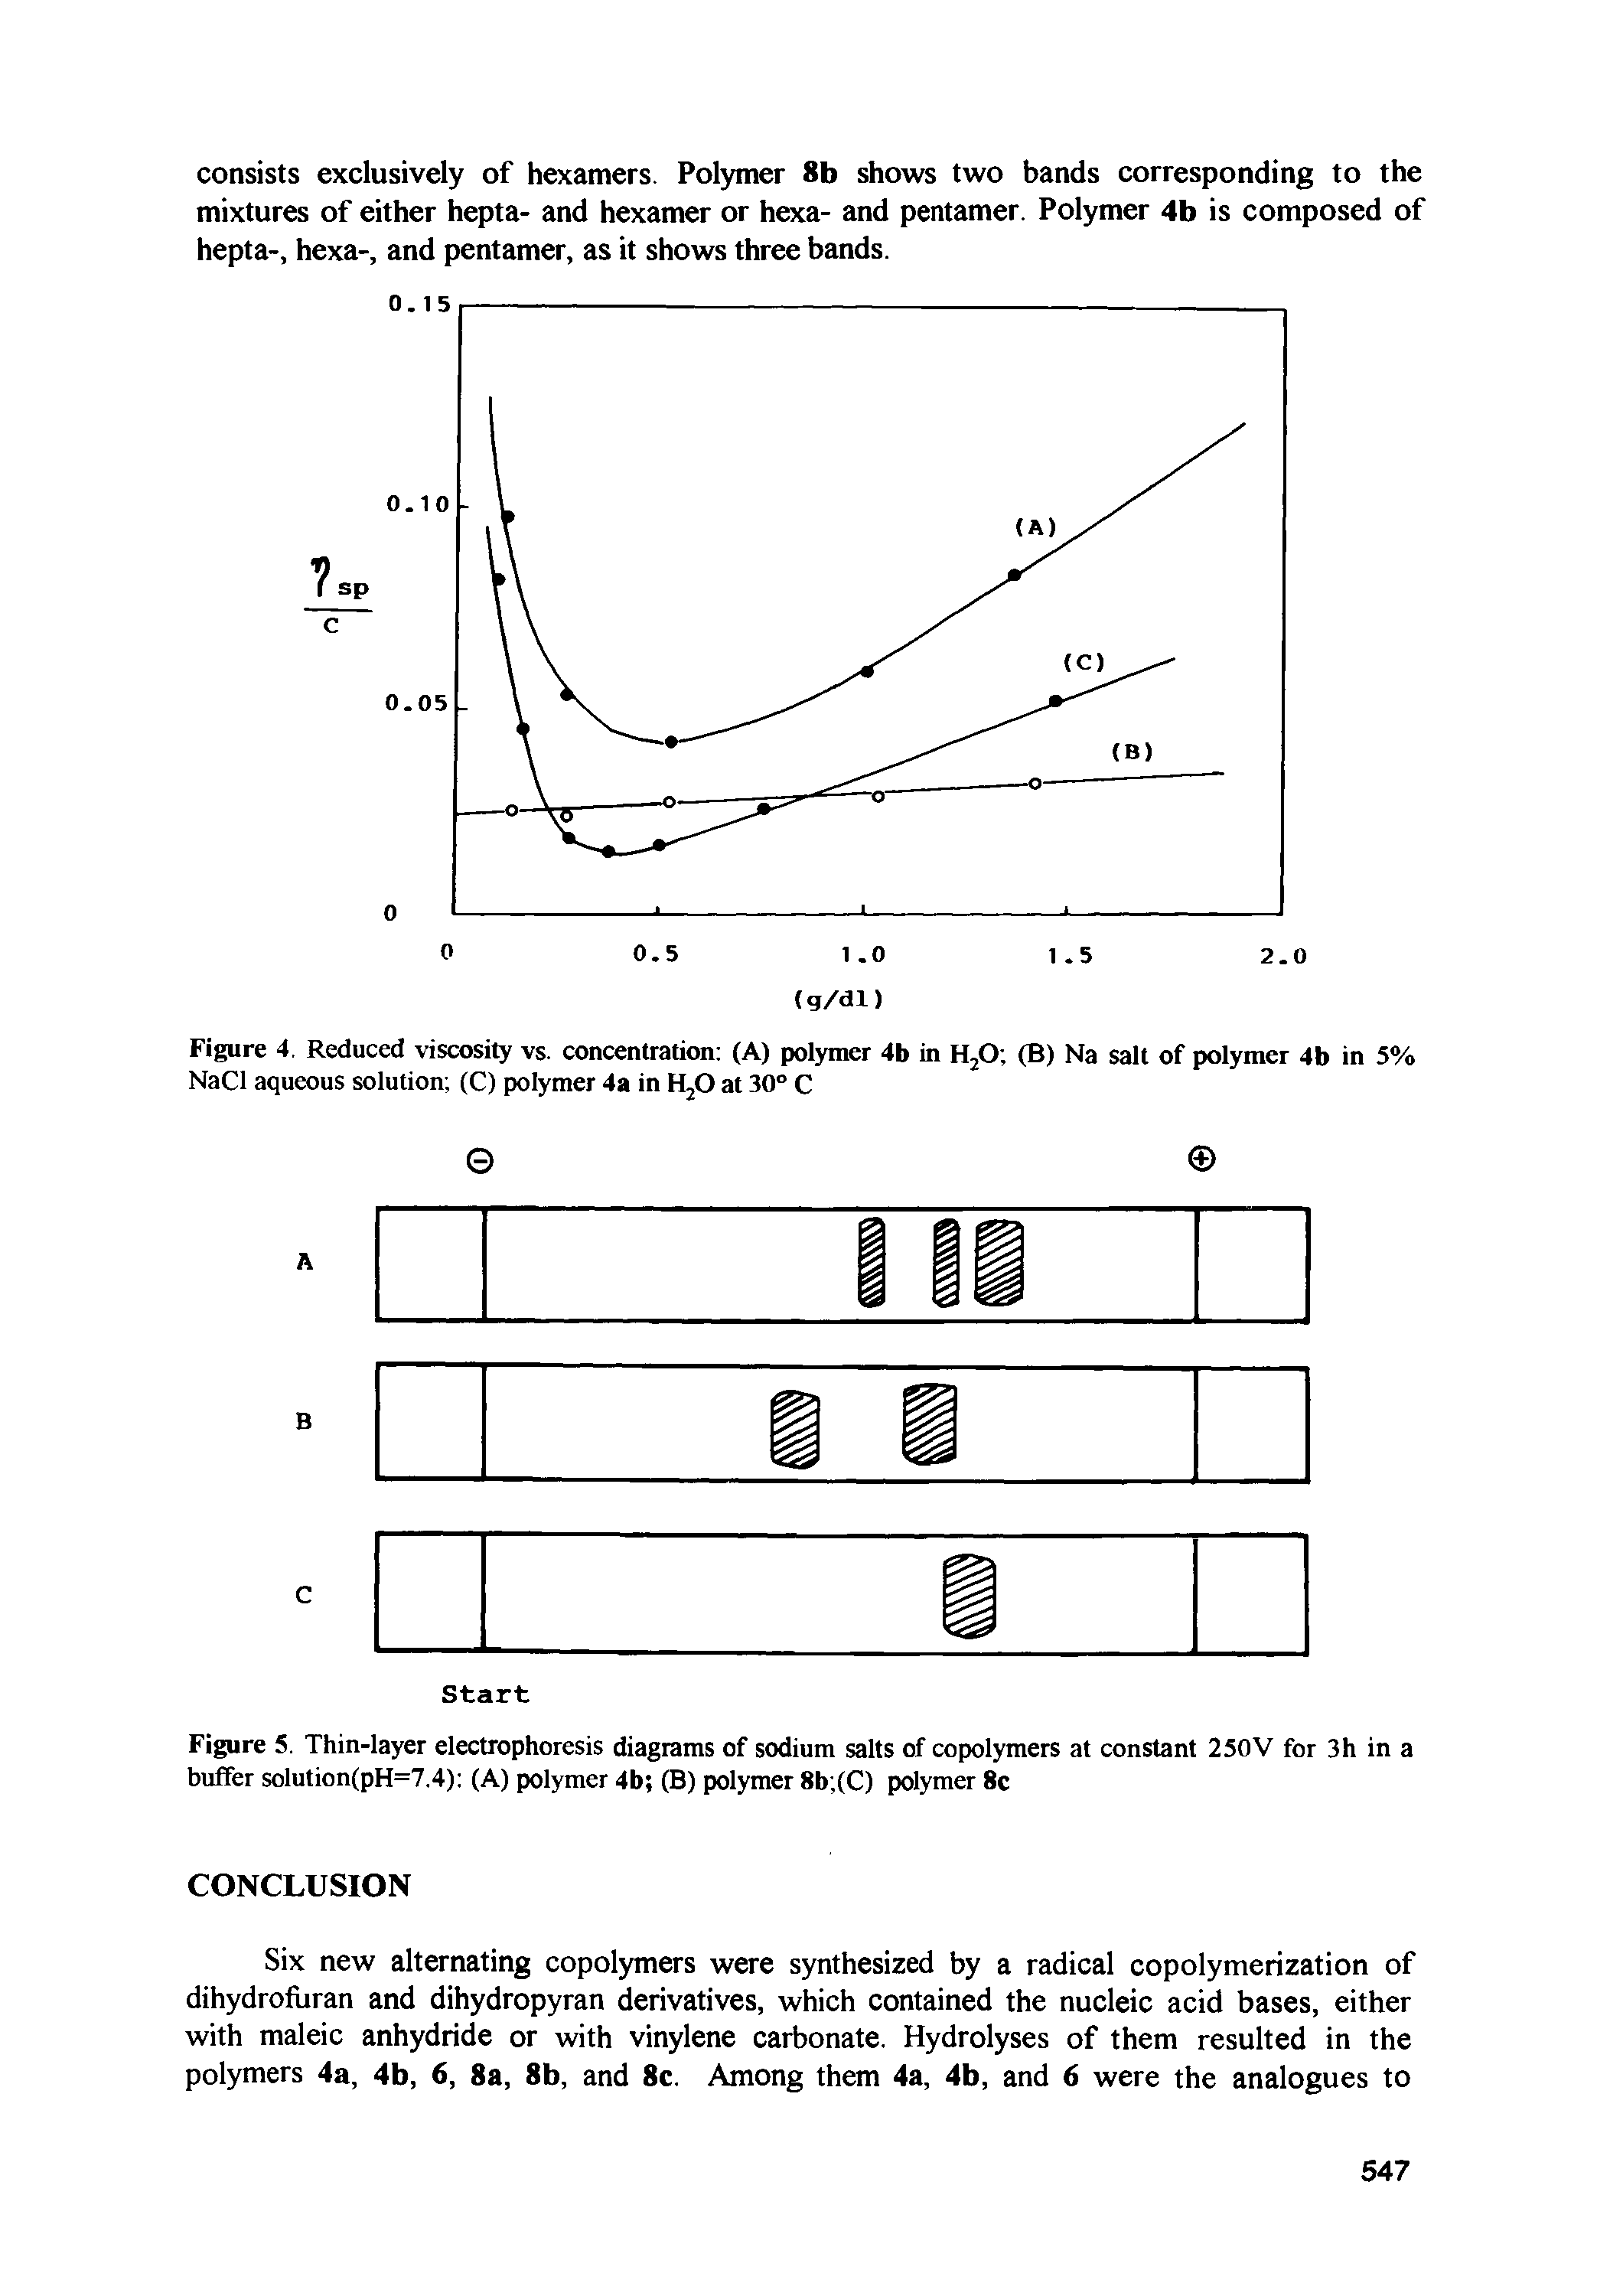 Figure 4, Reduced viscosity vs. concentration (A) polymer 4b in Hp (B) Na salt of polymer 4b in 5% NaCl aqueous solution (C) polymer 4a in HjO at 30° C...